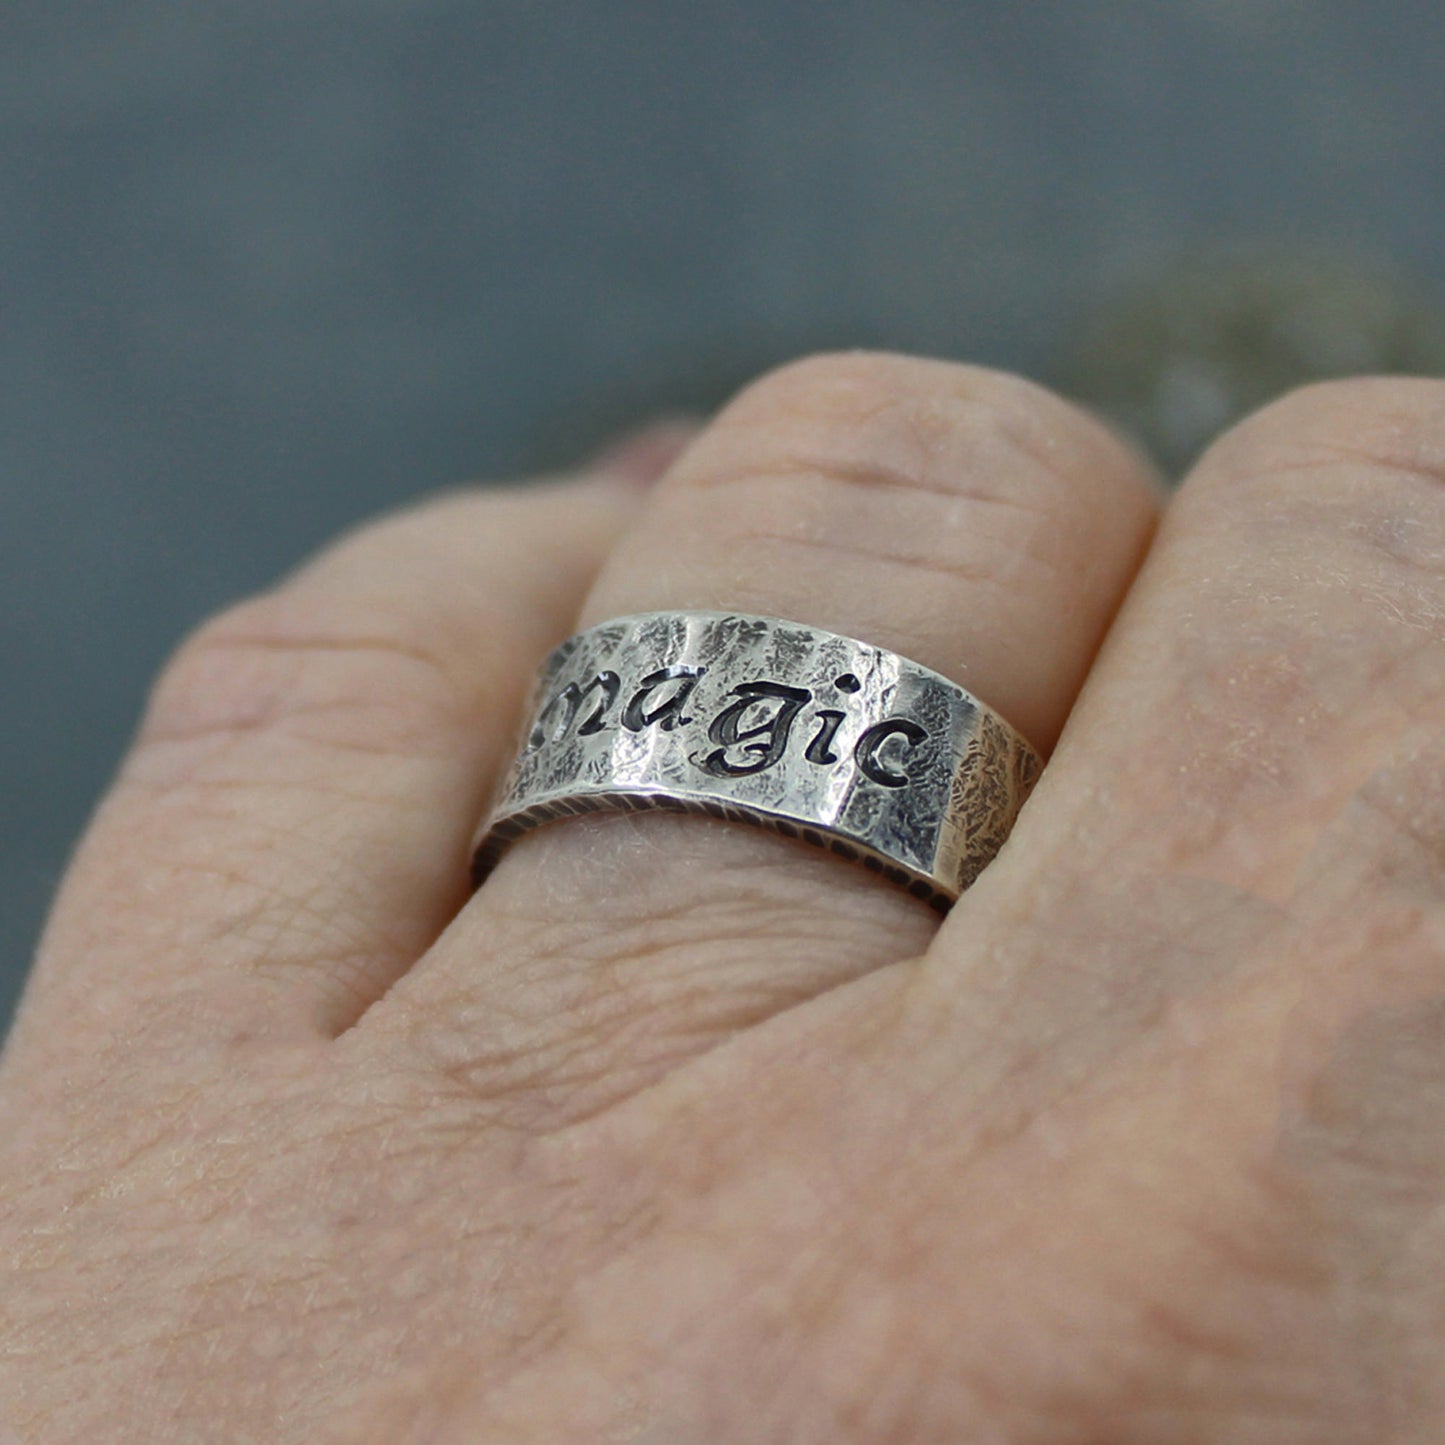 Magic silver ring shown on hand